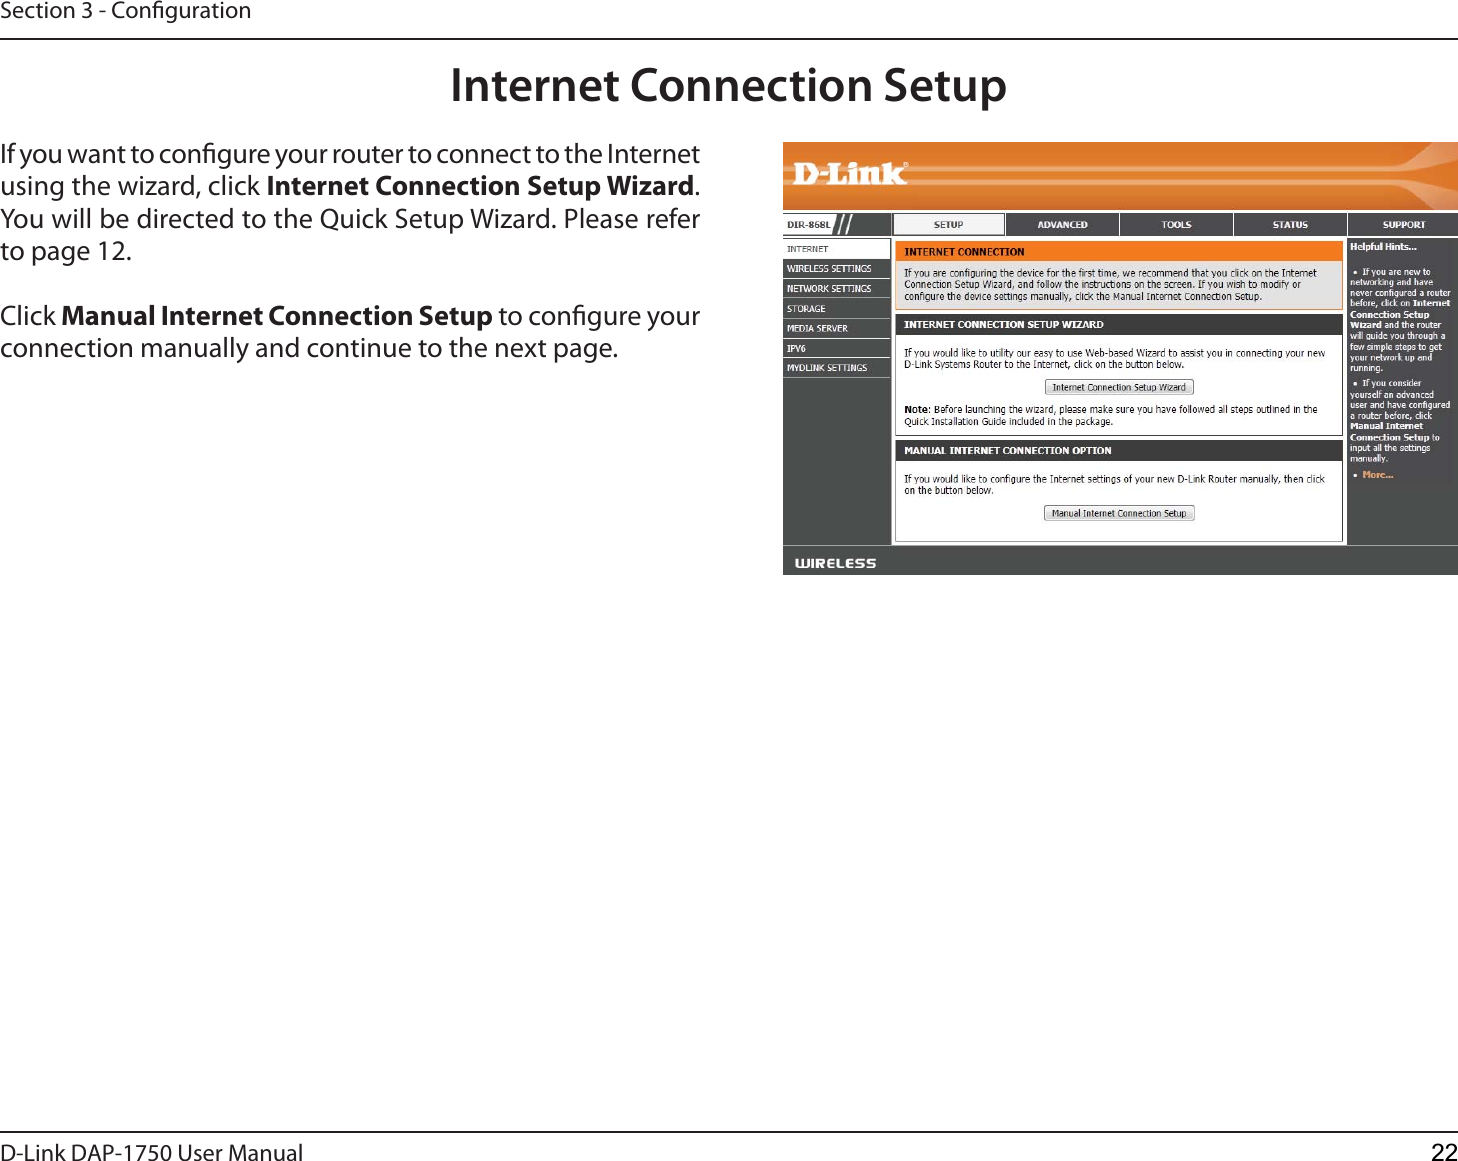 D-Link %&quot;1 User ManualSection 3 - CongurationInternet Connection SetupIf you want to congure your router to connect to the Internet using the wizard, click Internet Connection Setup Wizard. You will be directed to the Quick Setup Wizard. Please refer to page 12.Click Manual Internet Connection Setup to congure your connection manually and continue to the next page.22